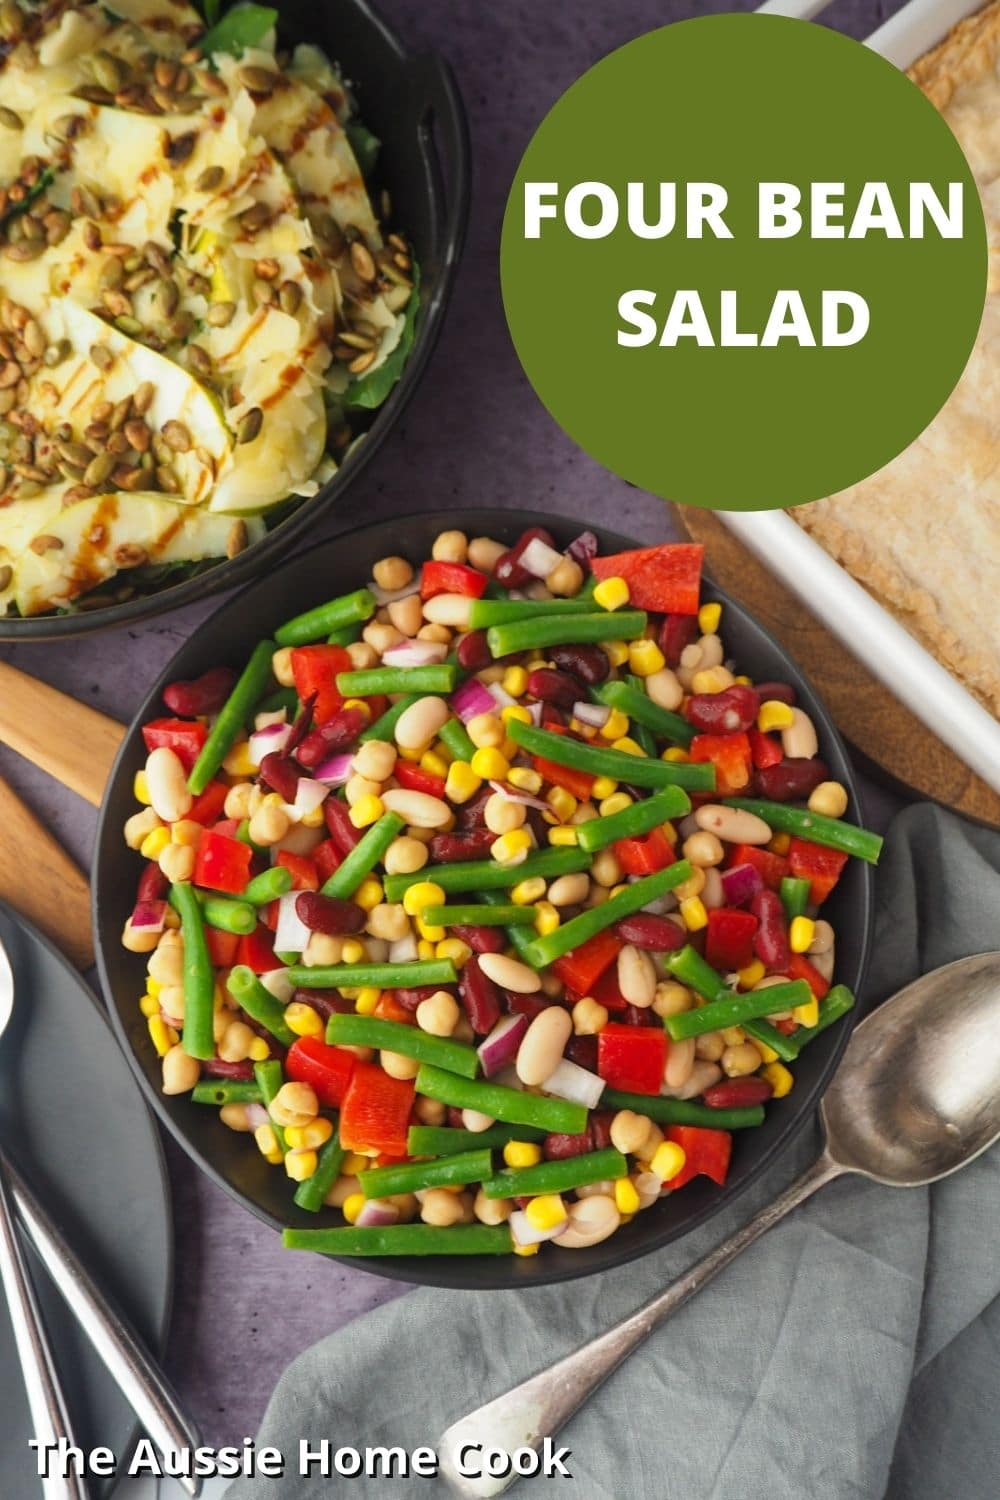 Bowl of salad with serving spoon, with pie and another salad on the side, with text overlay, Four Bean Salad and The Aussie Home Cook.